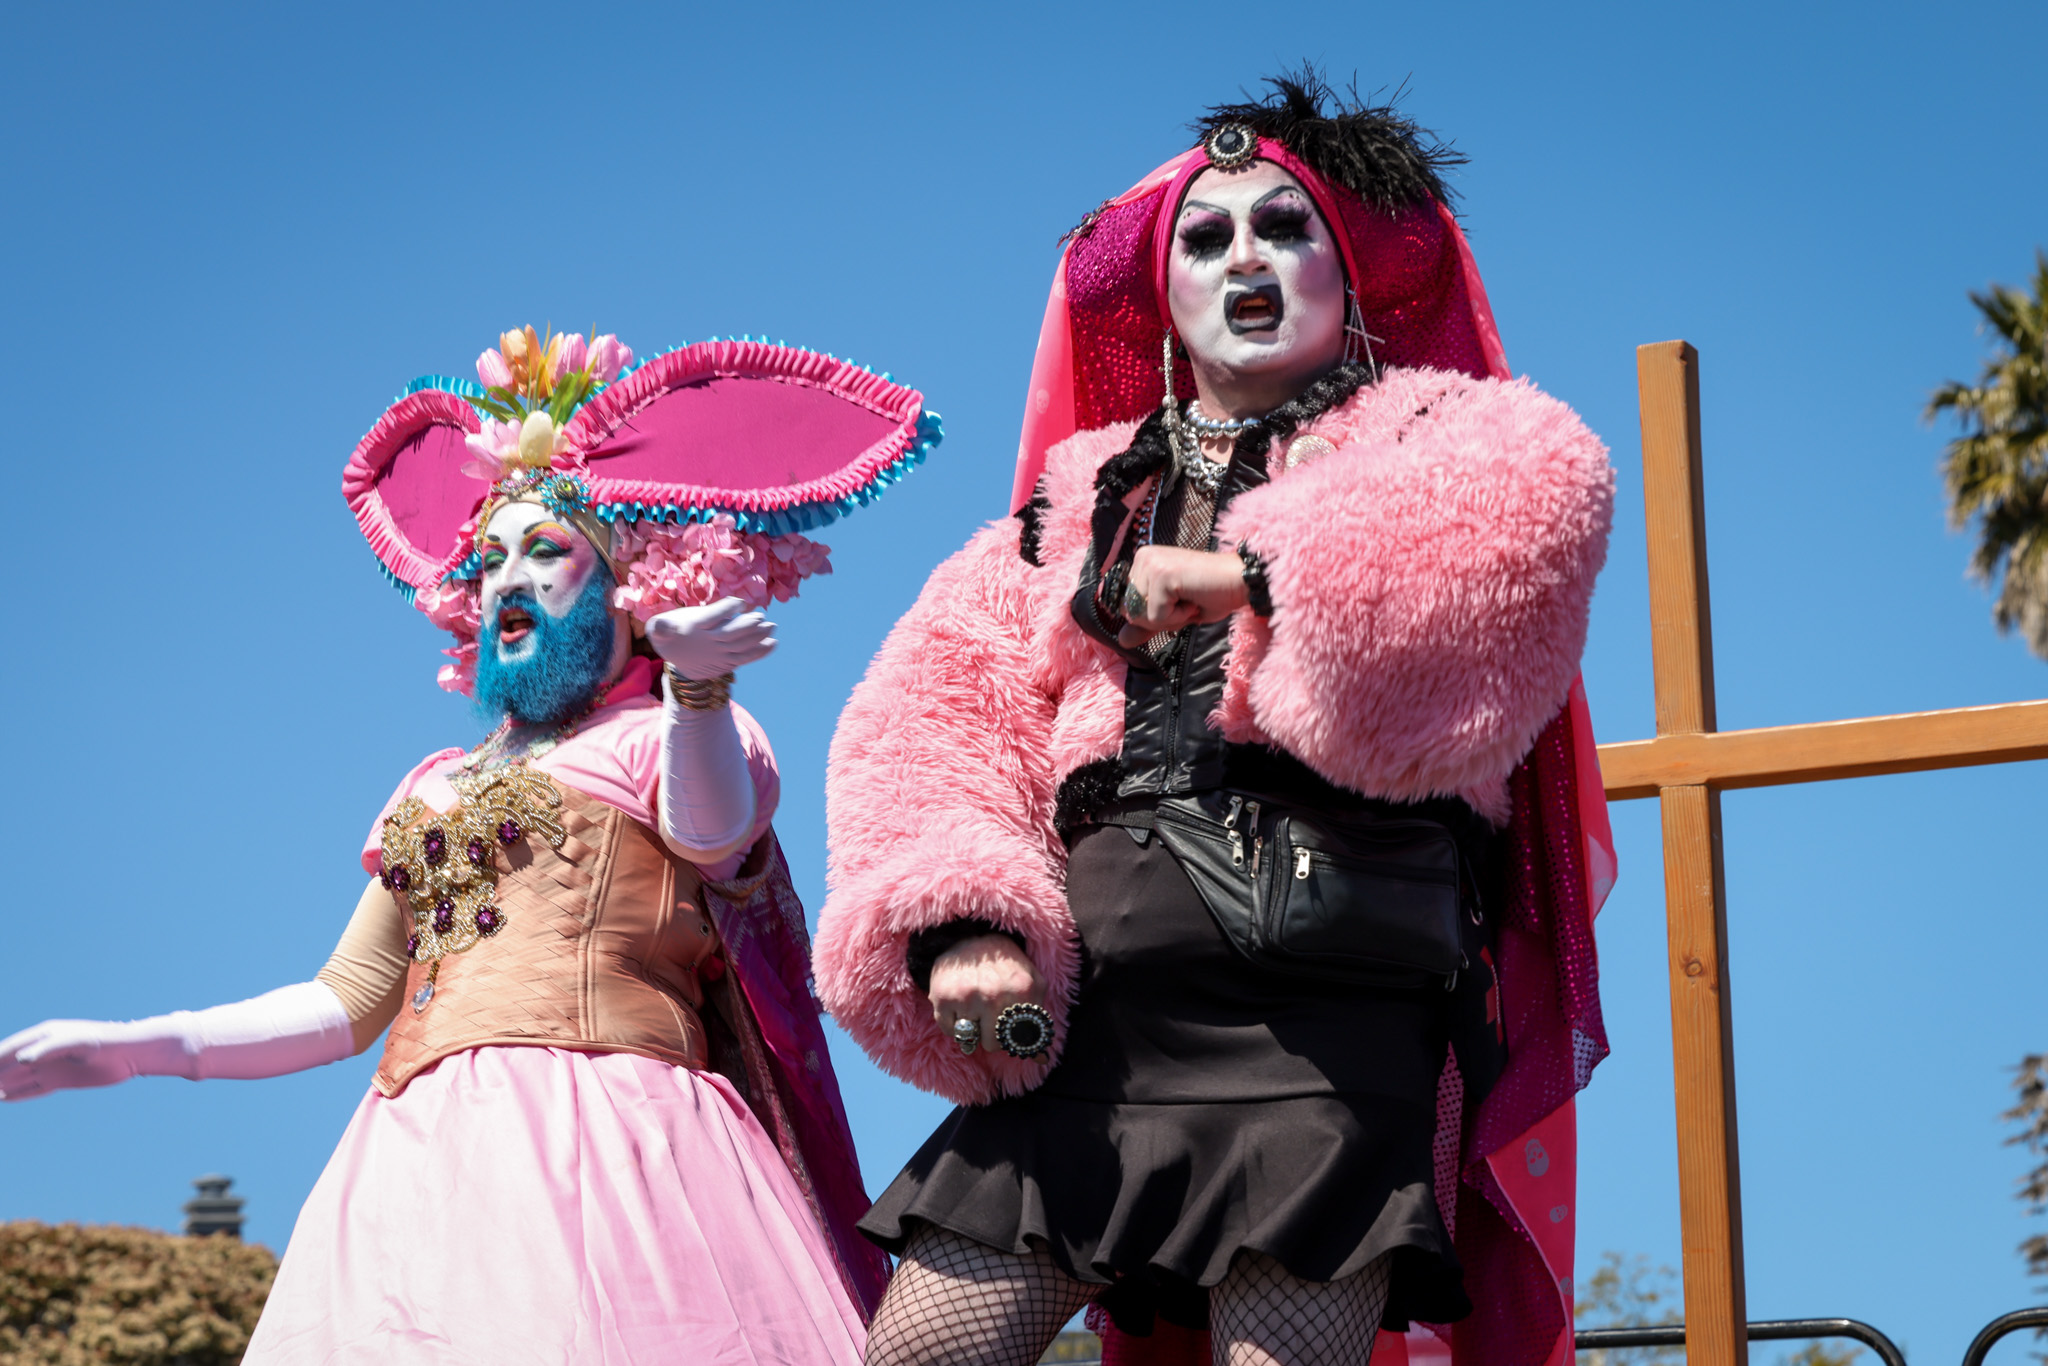 San Francisco Giants Pride night had everything, including a drag